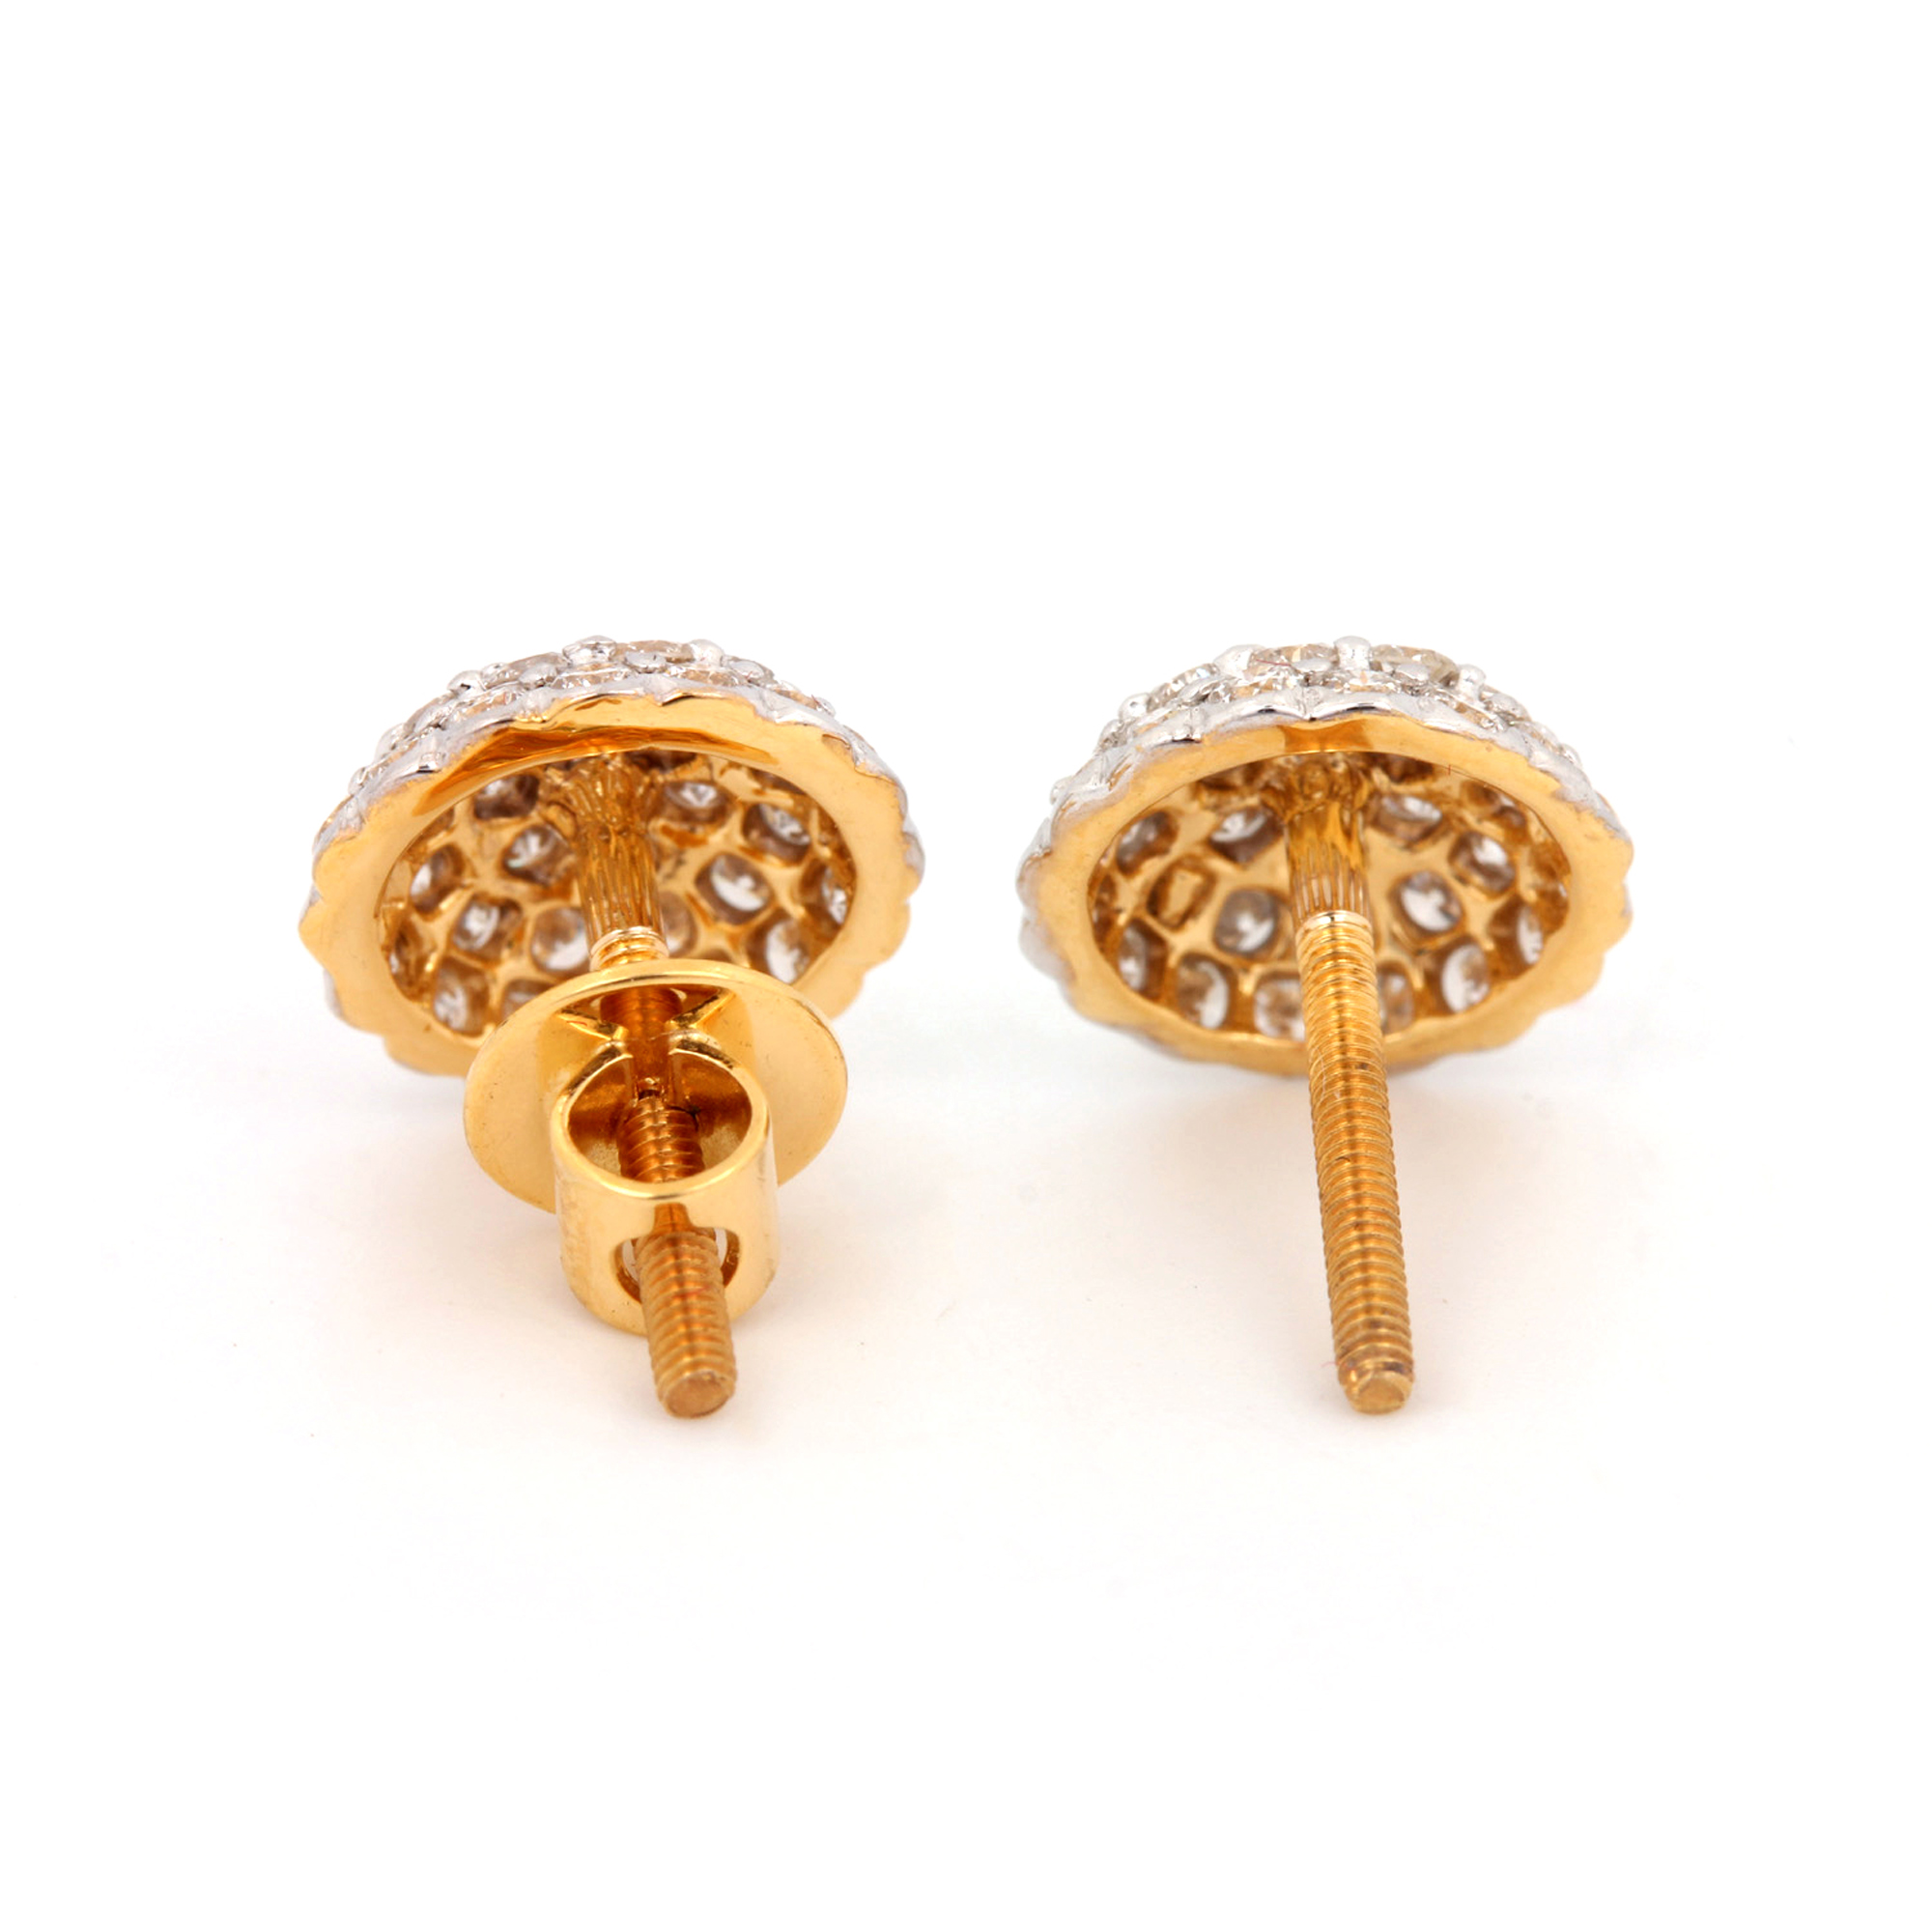 Good Looking Gold Earrings Adorned With Diamond